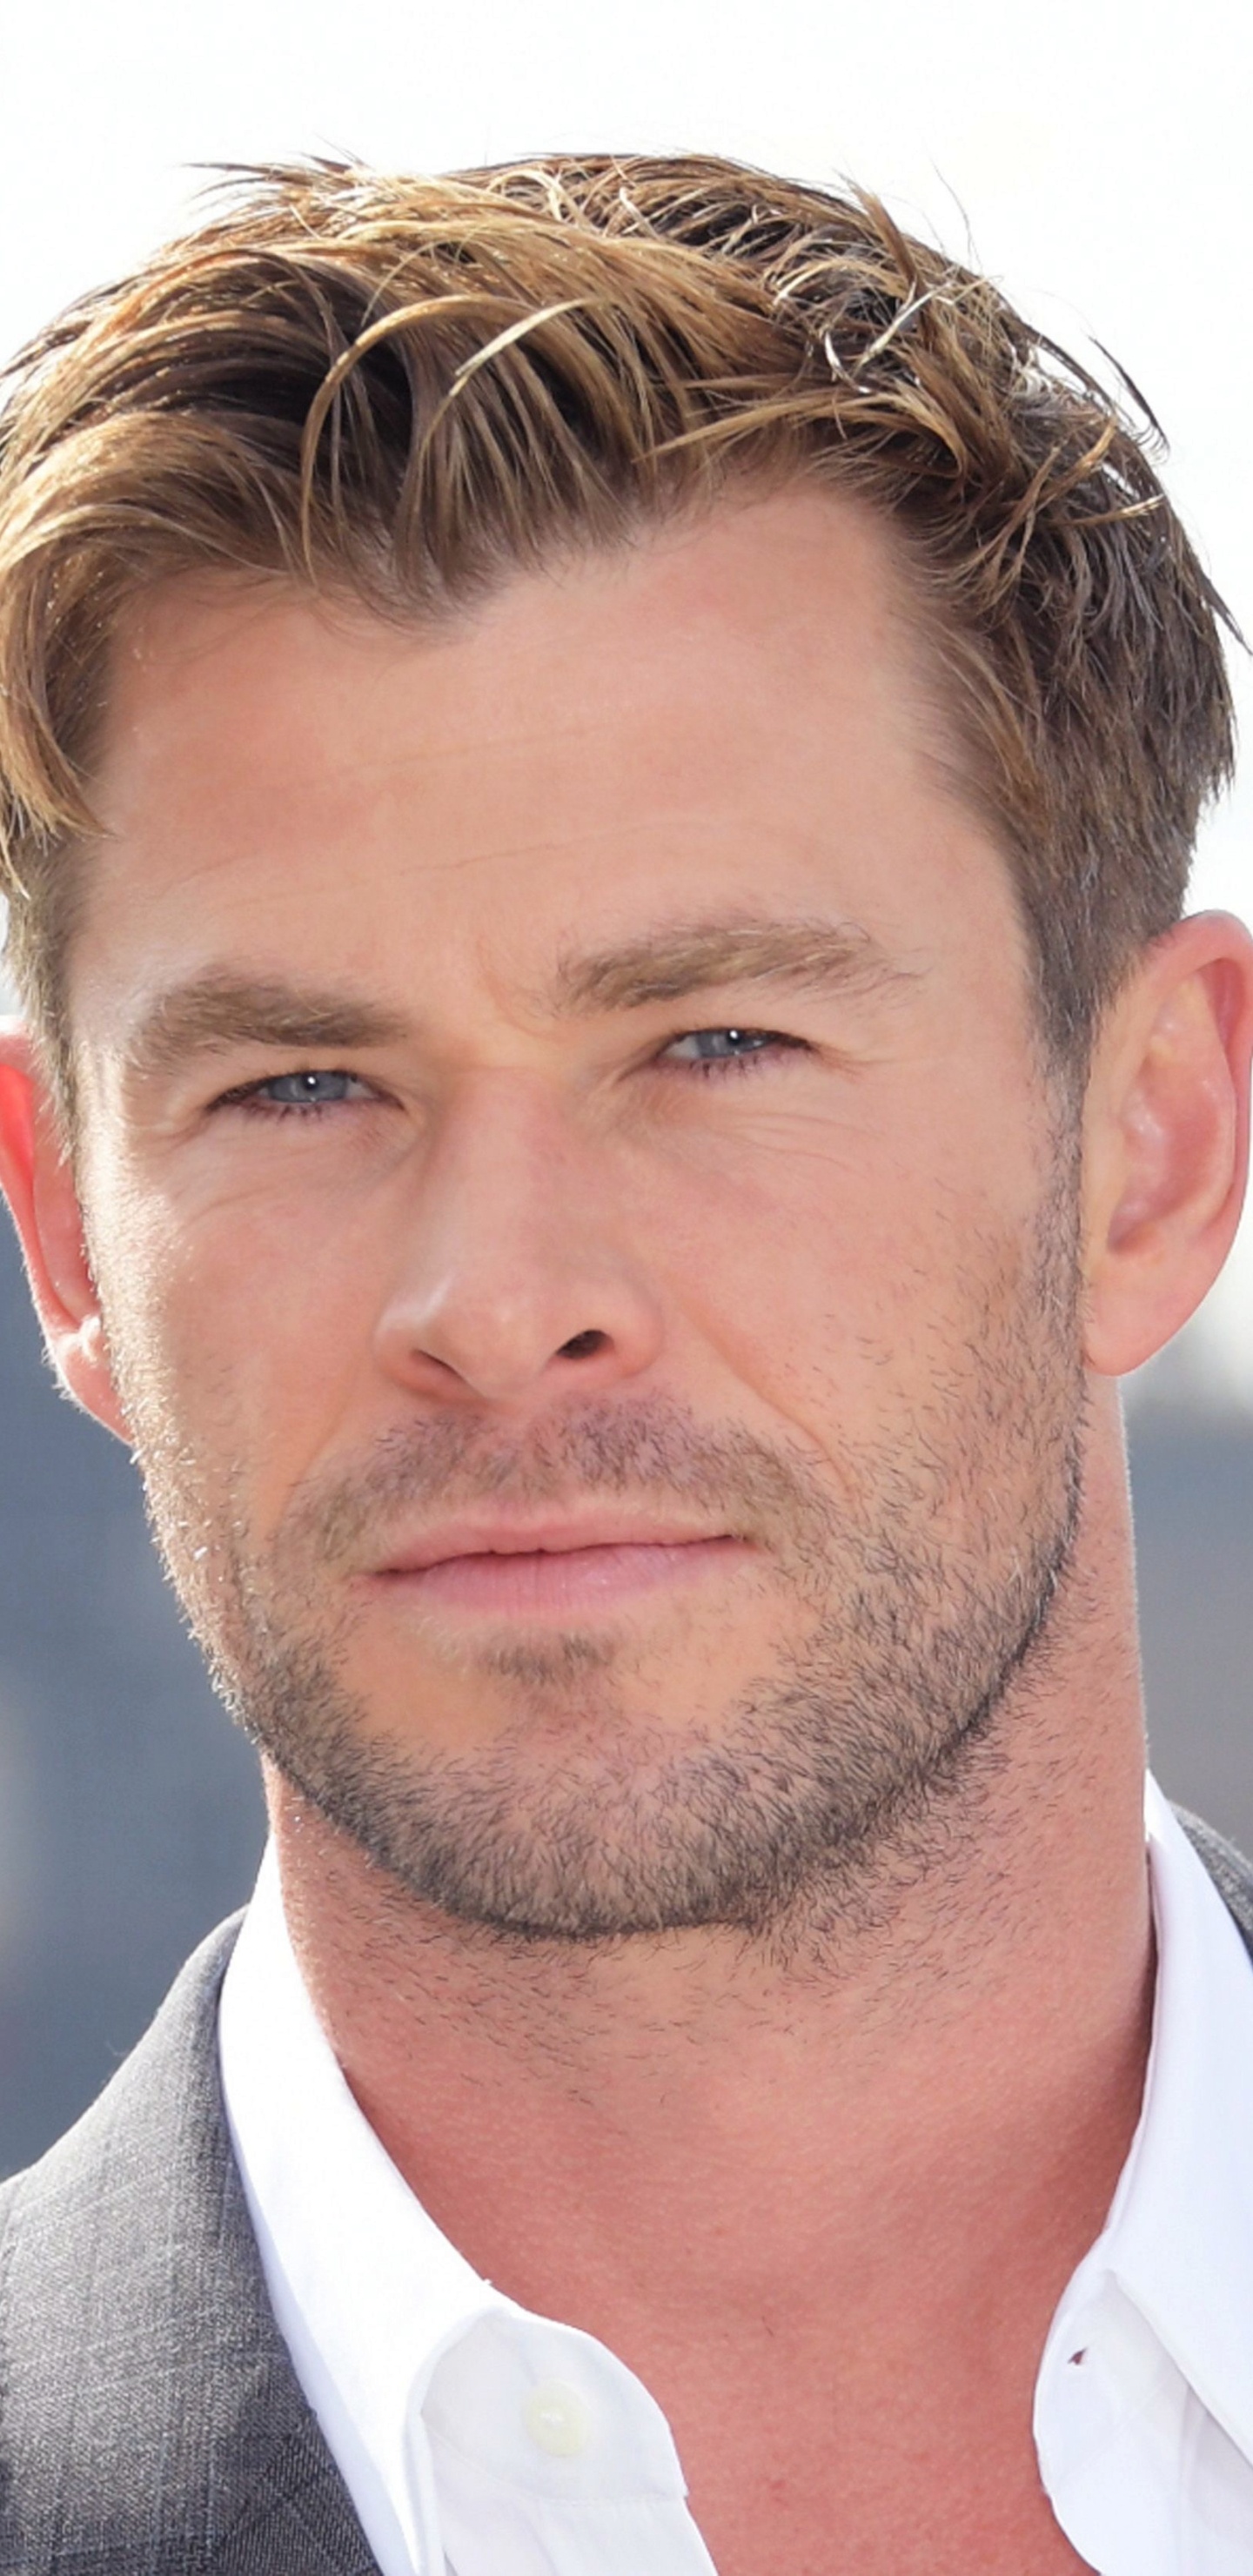 Chris Hemsworth: Celebrity, One of the world's highest-paid actors. 1440x2960 HD Background.